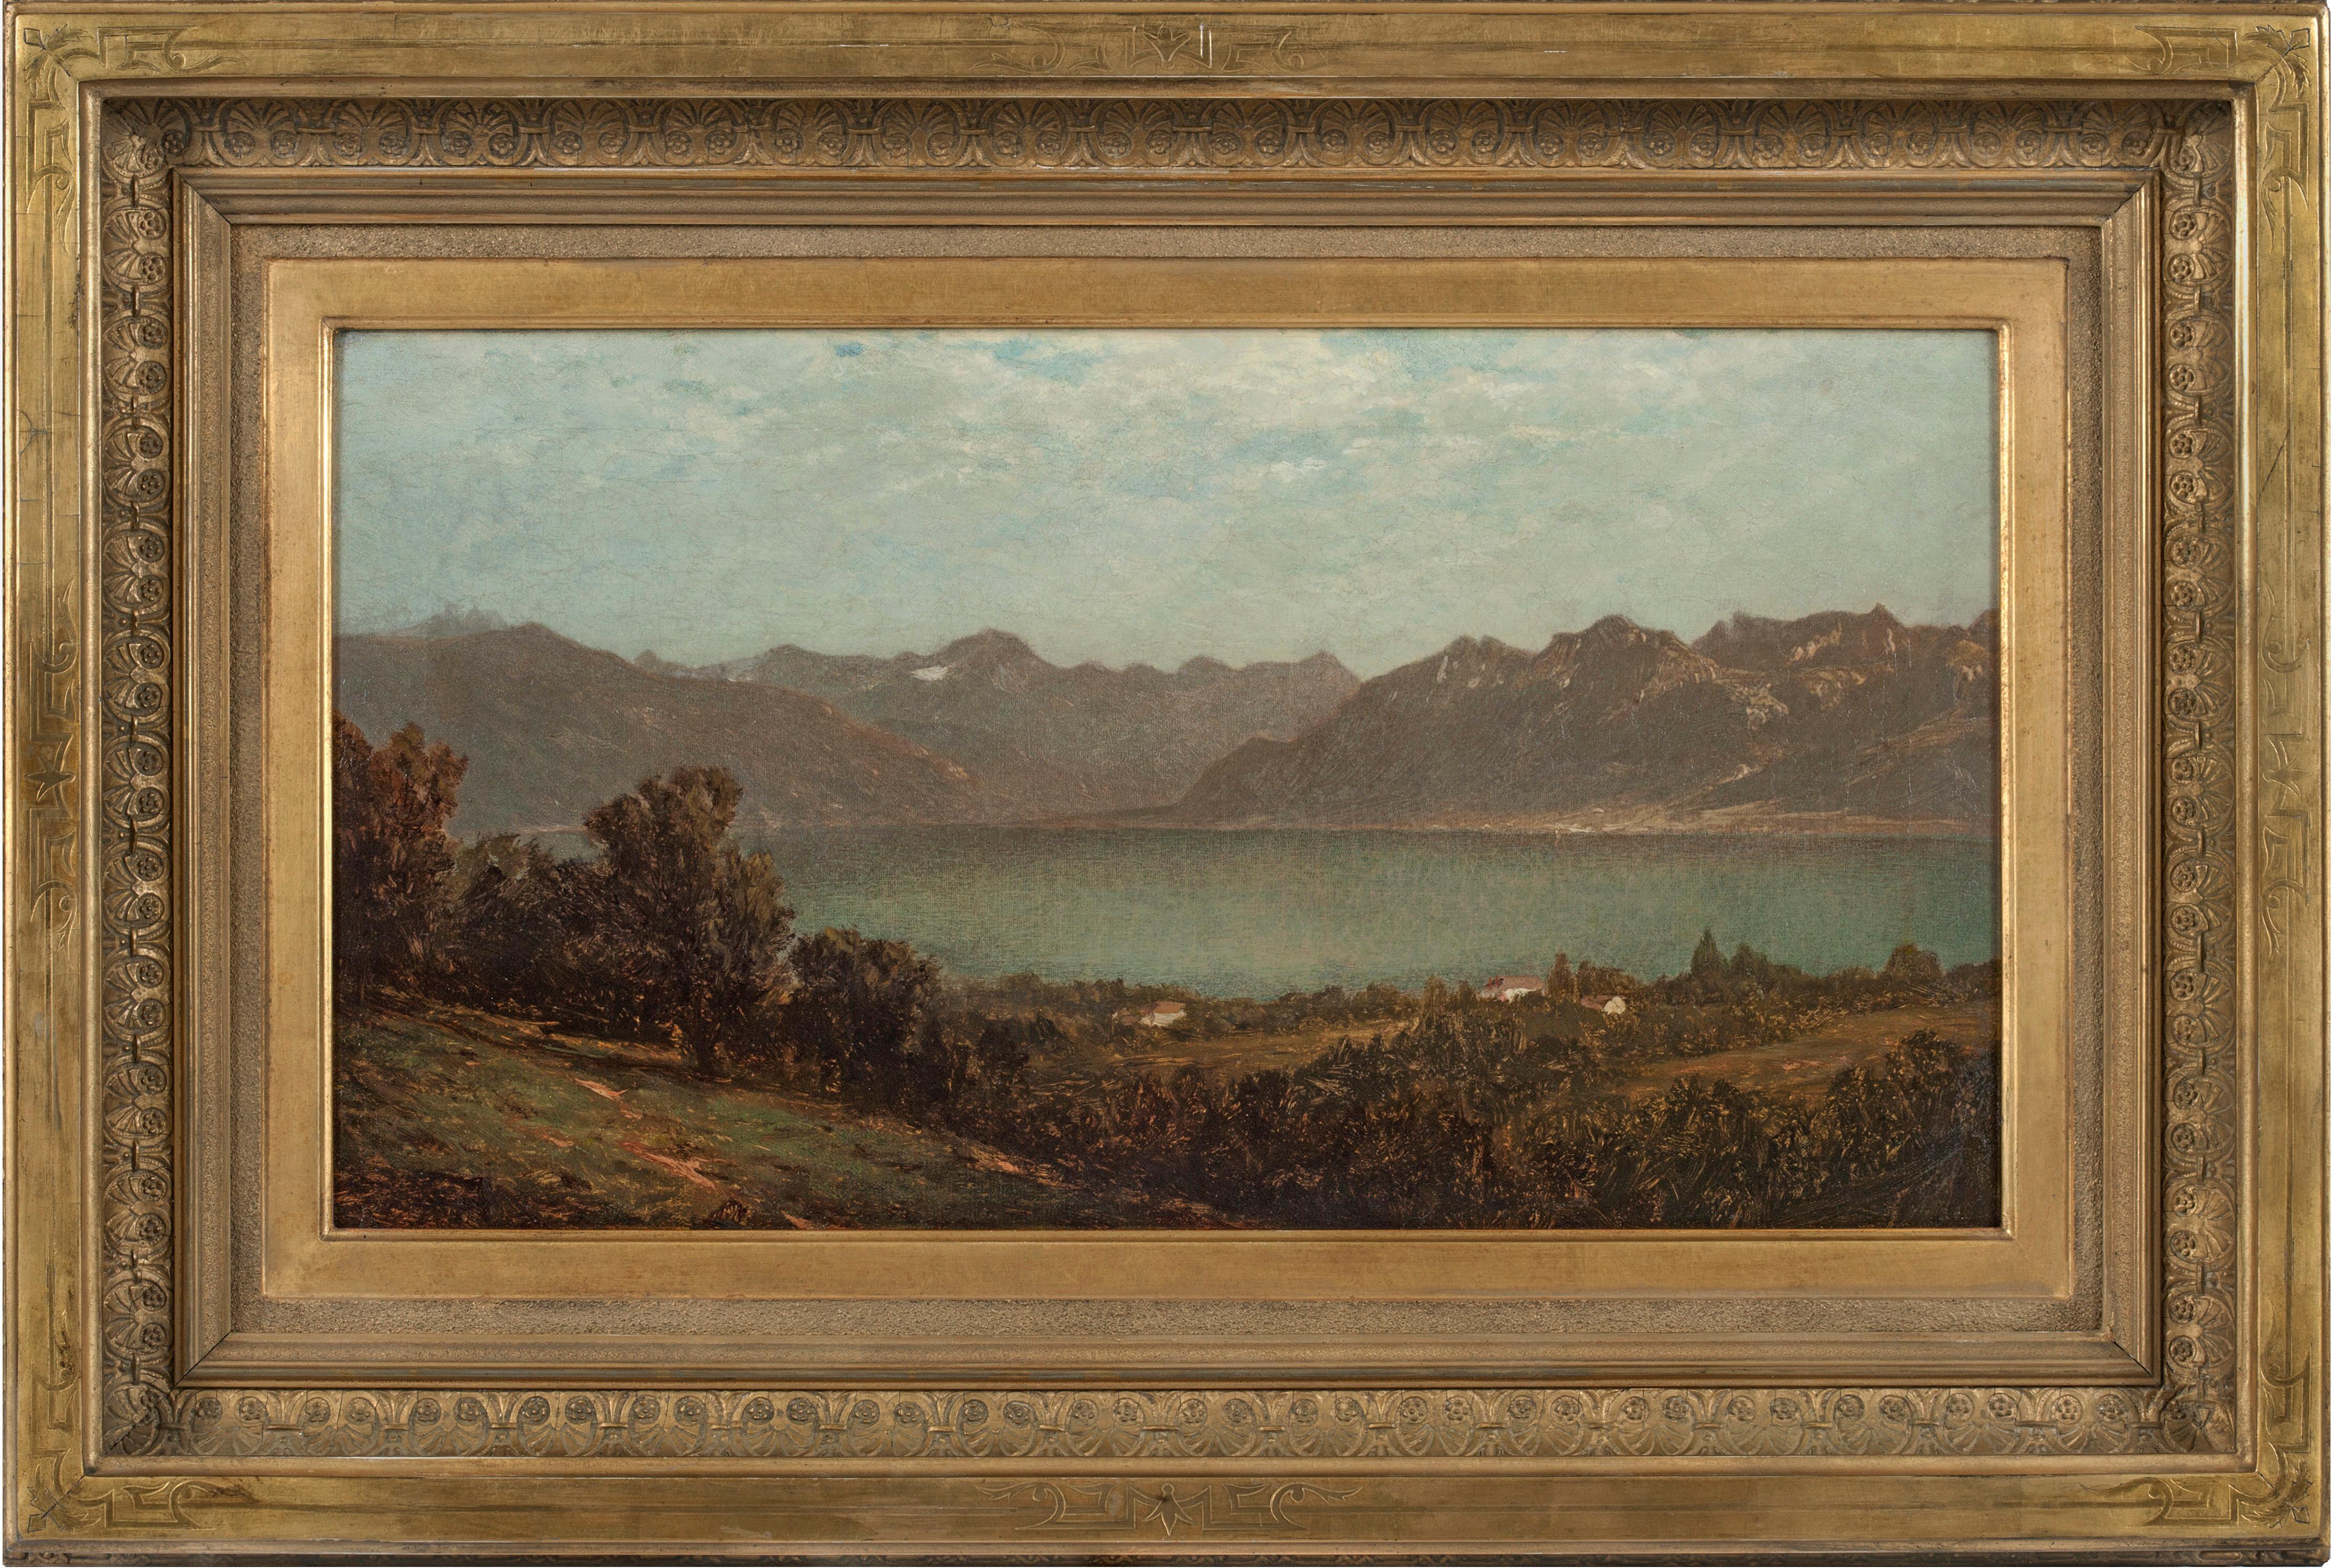 John William Casilear (1811-1893)
Mountain Lake
Oil on canvas
11 ¼ x 21 inches
Estate stamp verso

PROVENANCE: Spencertown Art and Antiques, Spencertown, NY; to private collector, 1986.

